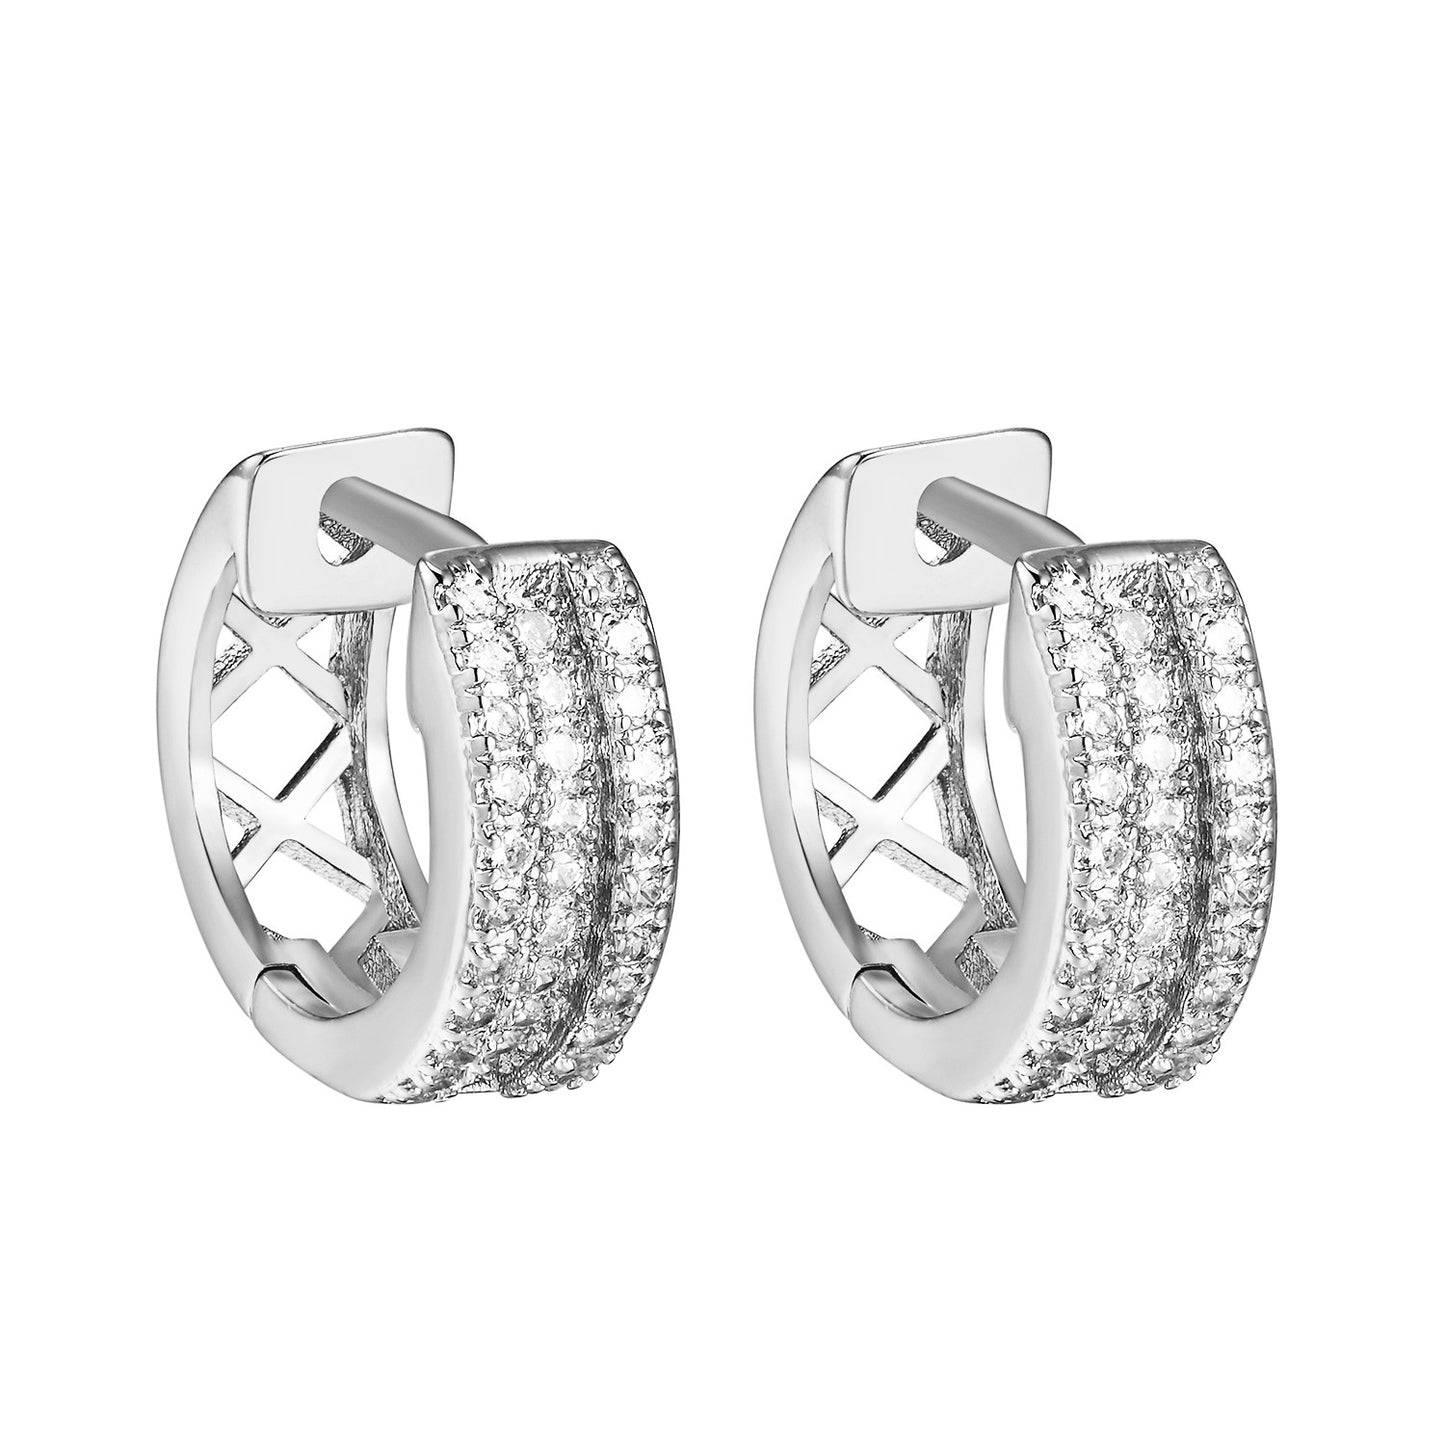 Hoop Style Huggie Earrings Silver Tone Round Cut Simulated Diamonds 13mm Unique